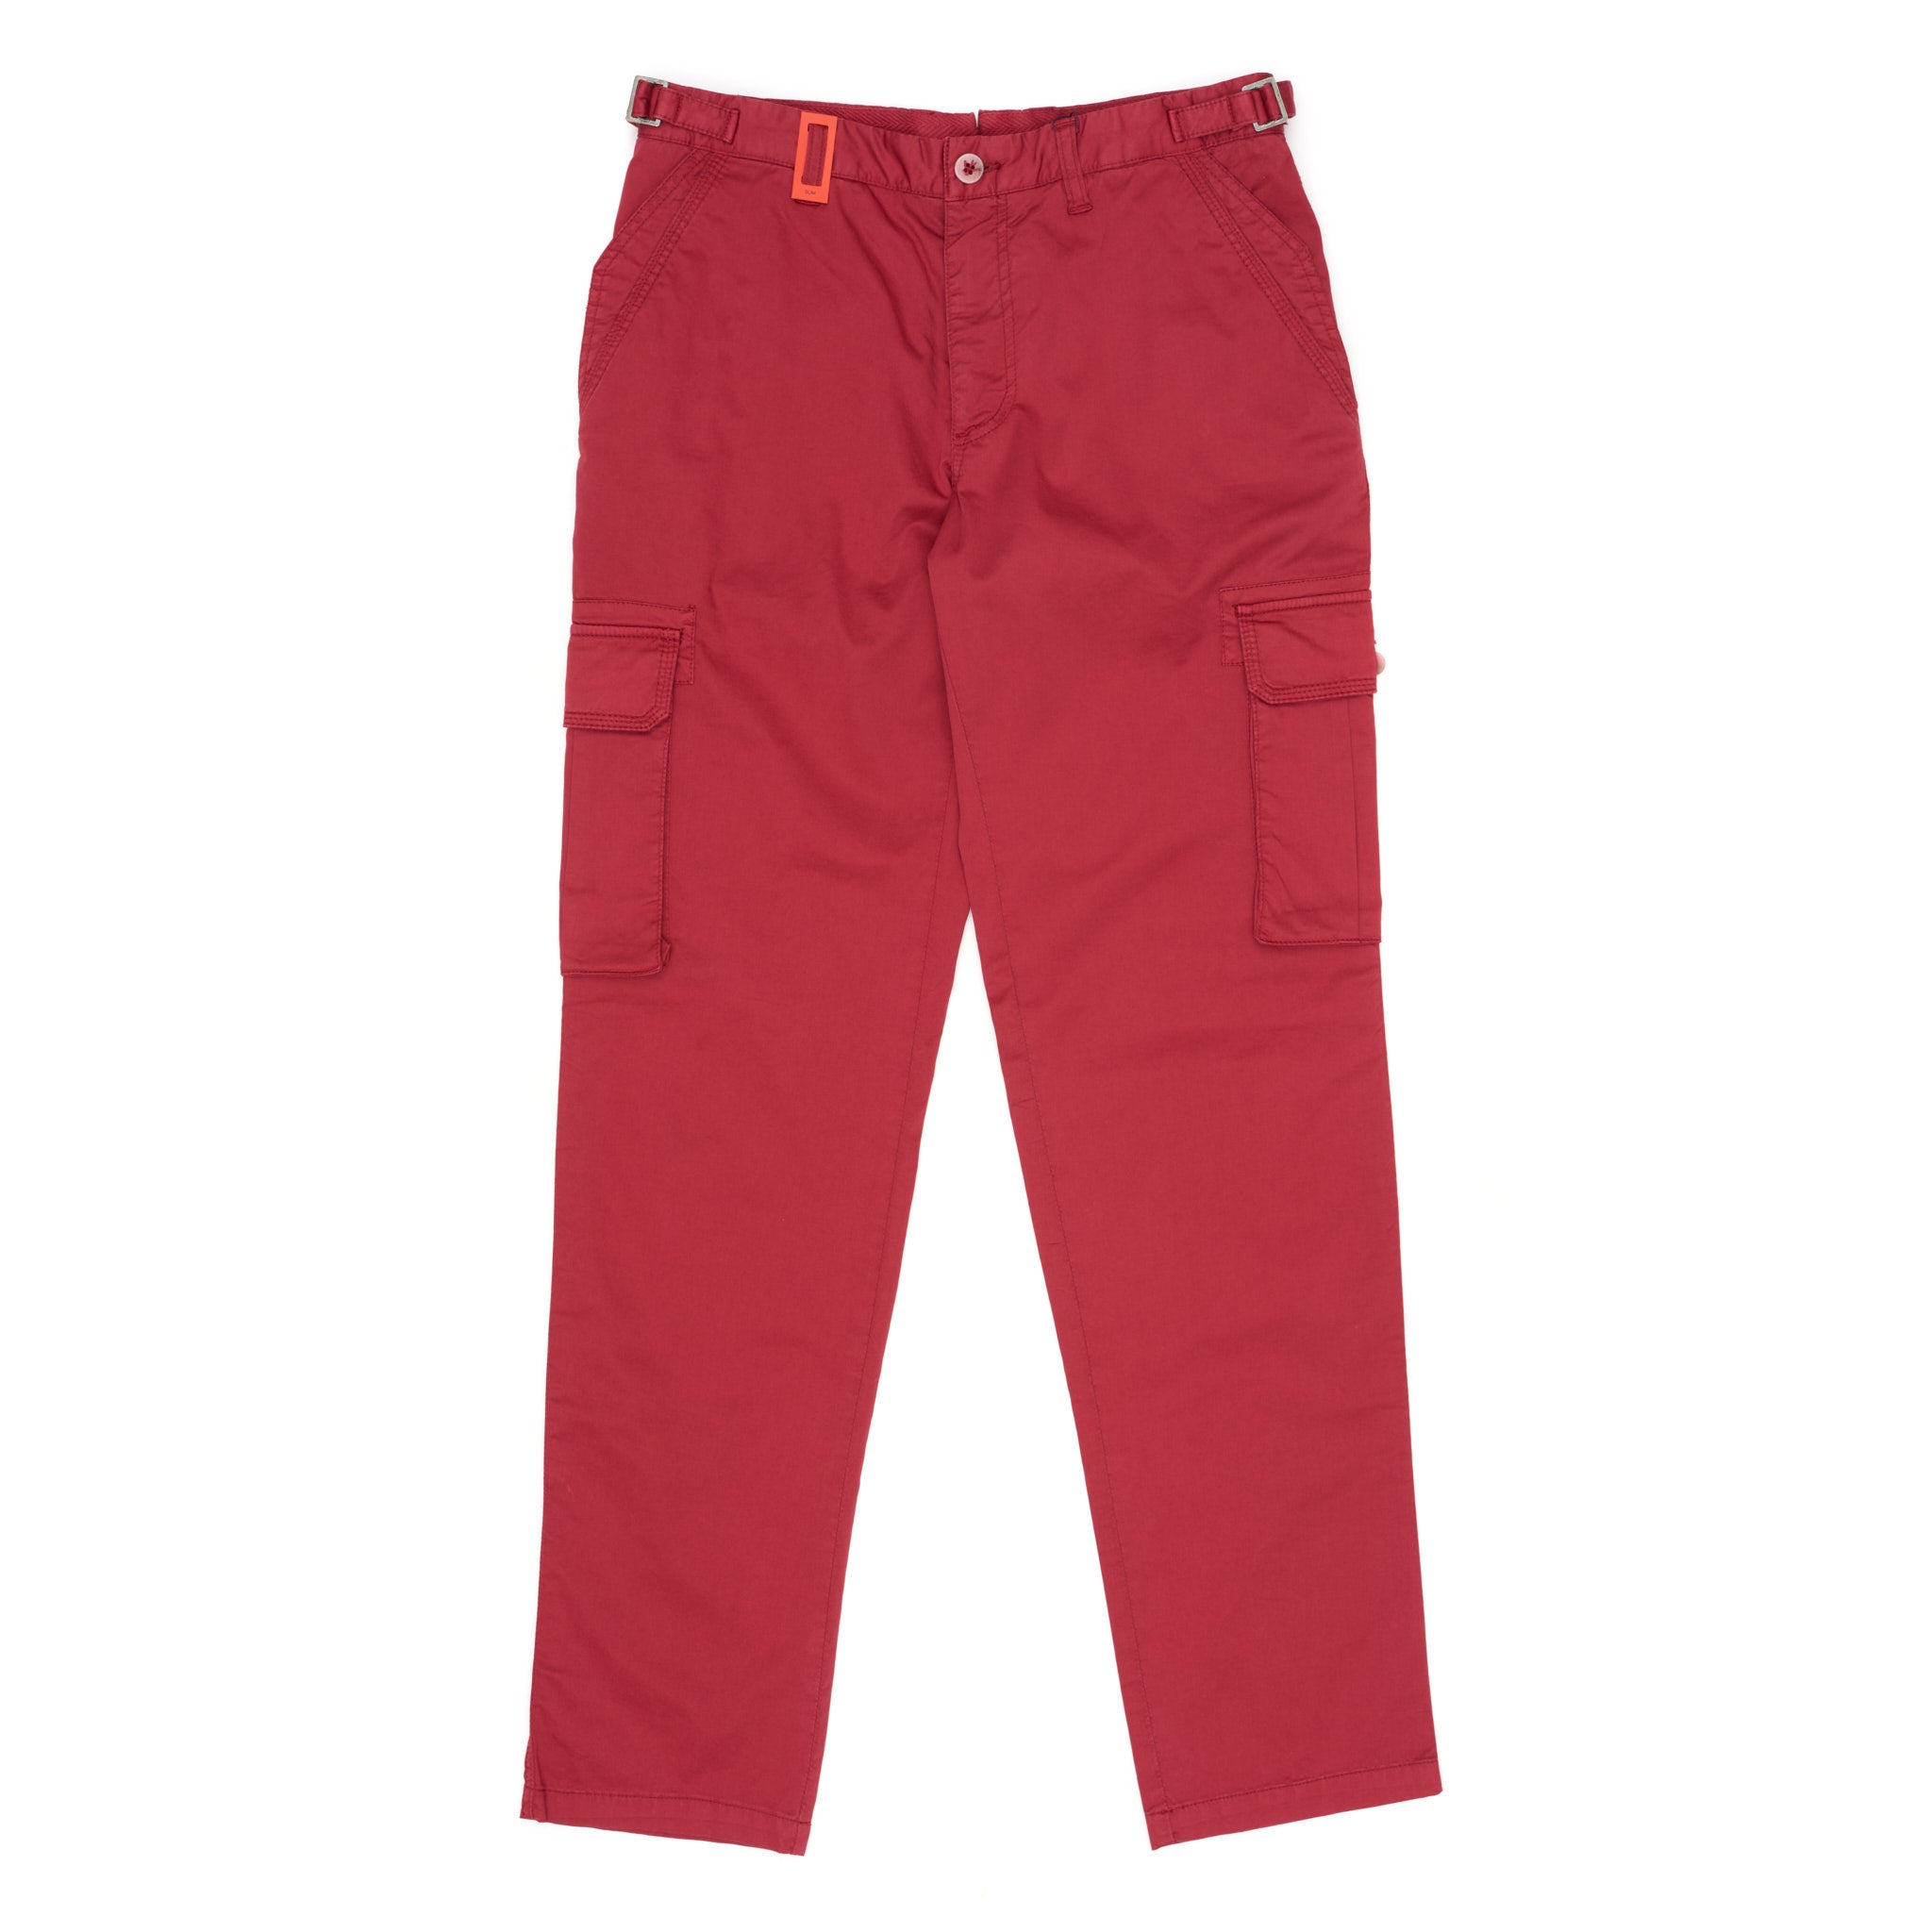 ISAIA Napoli Red Cotton Flat Front Cargo Pants EU 46 NEW US 30 Slim Fit ISAIA